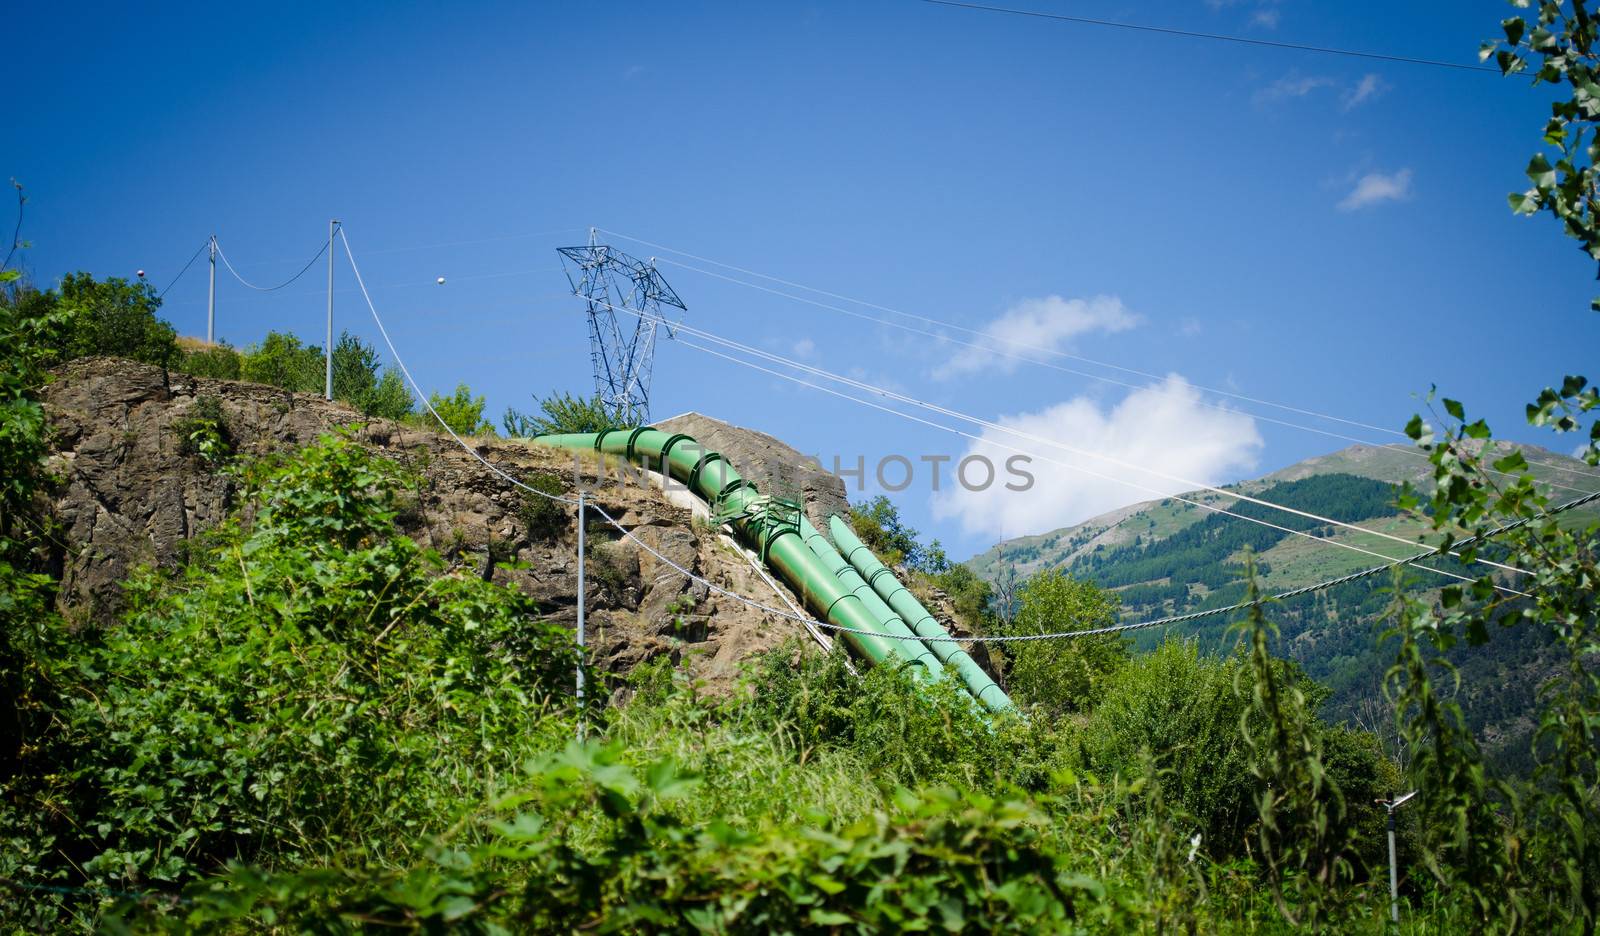 Hydroelectric pipes and electric power lines by artofphoto